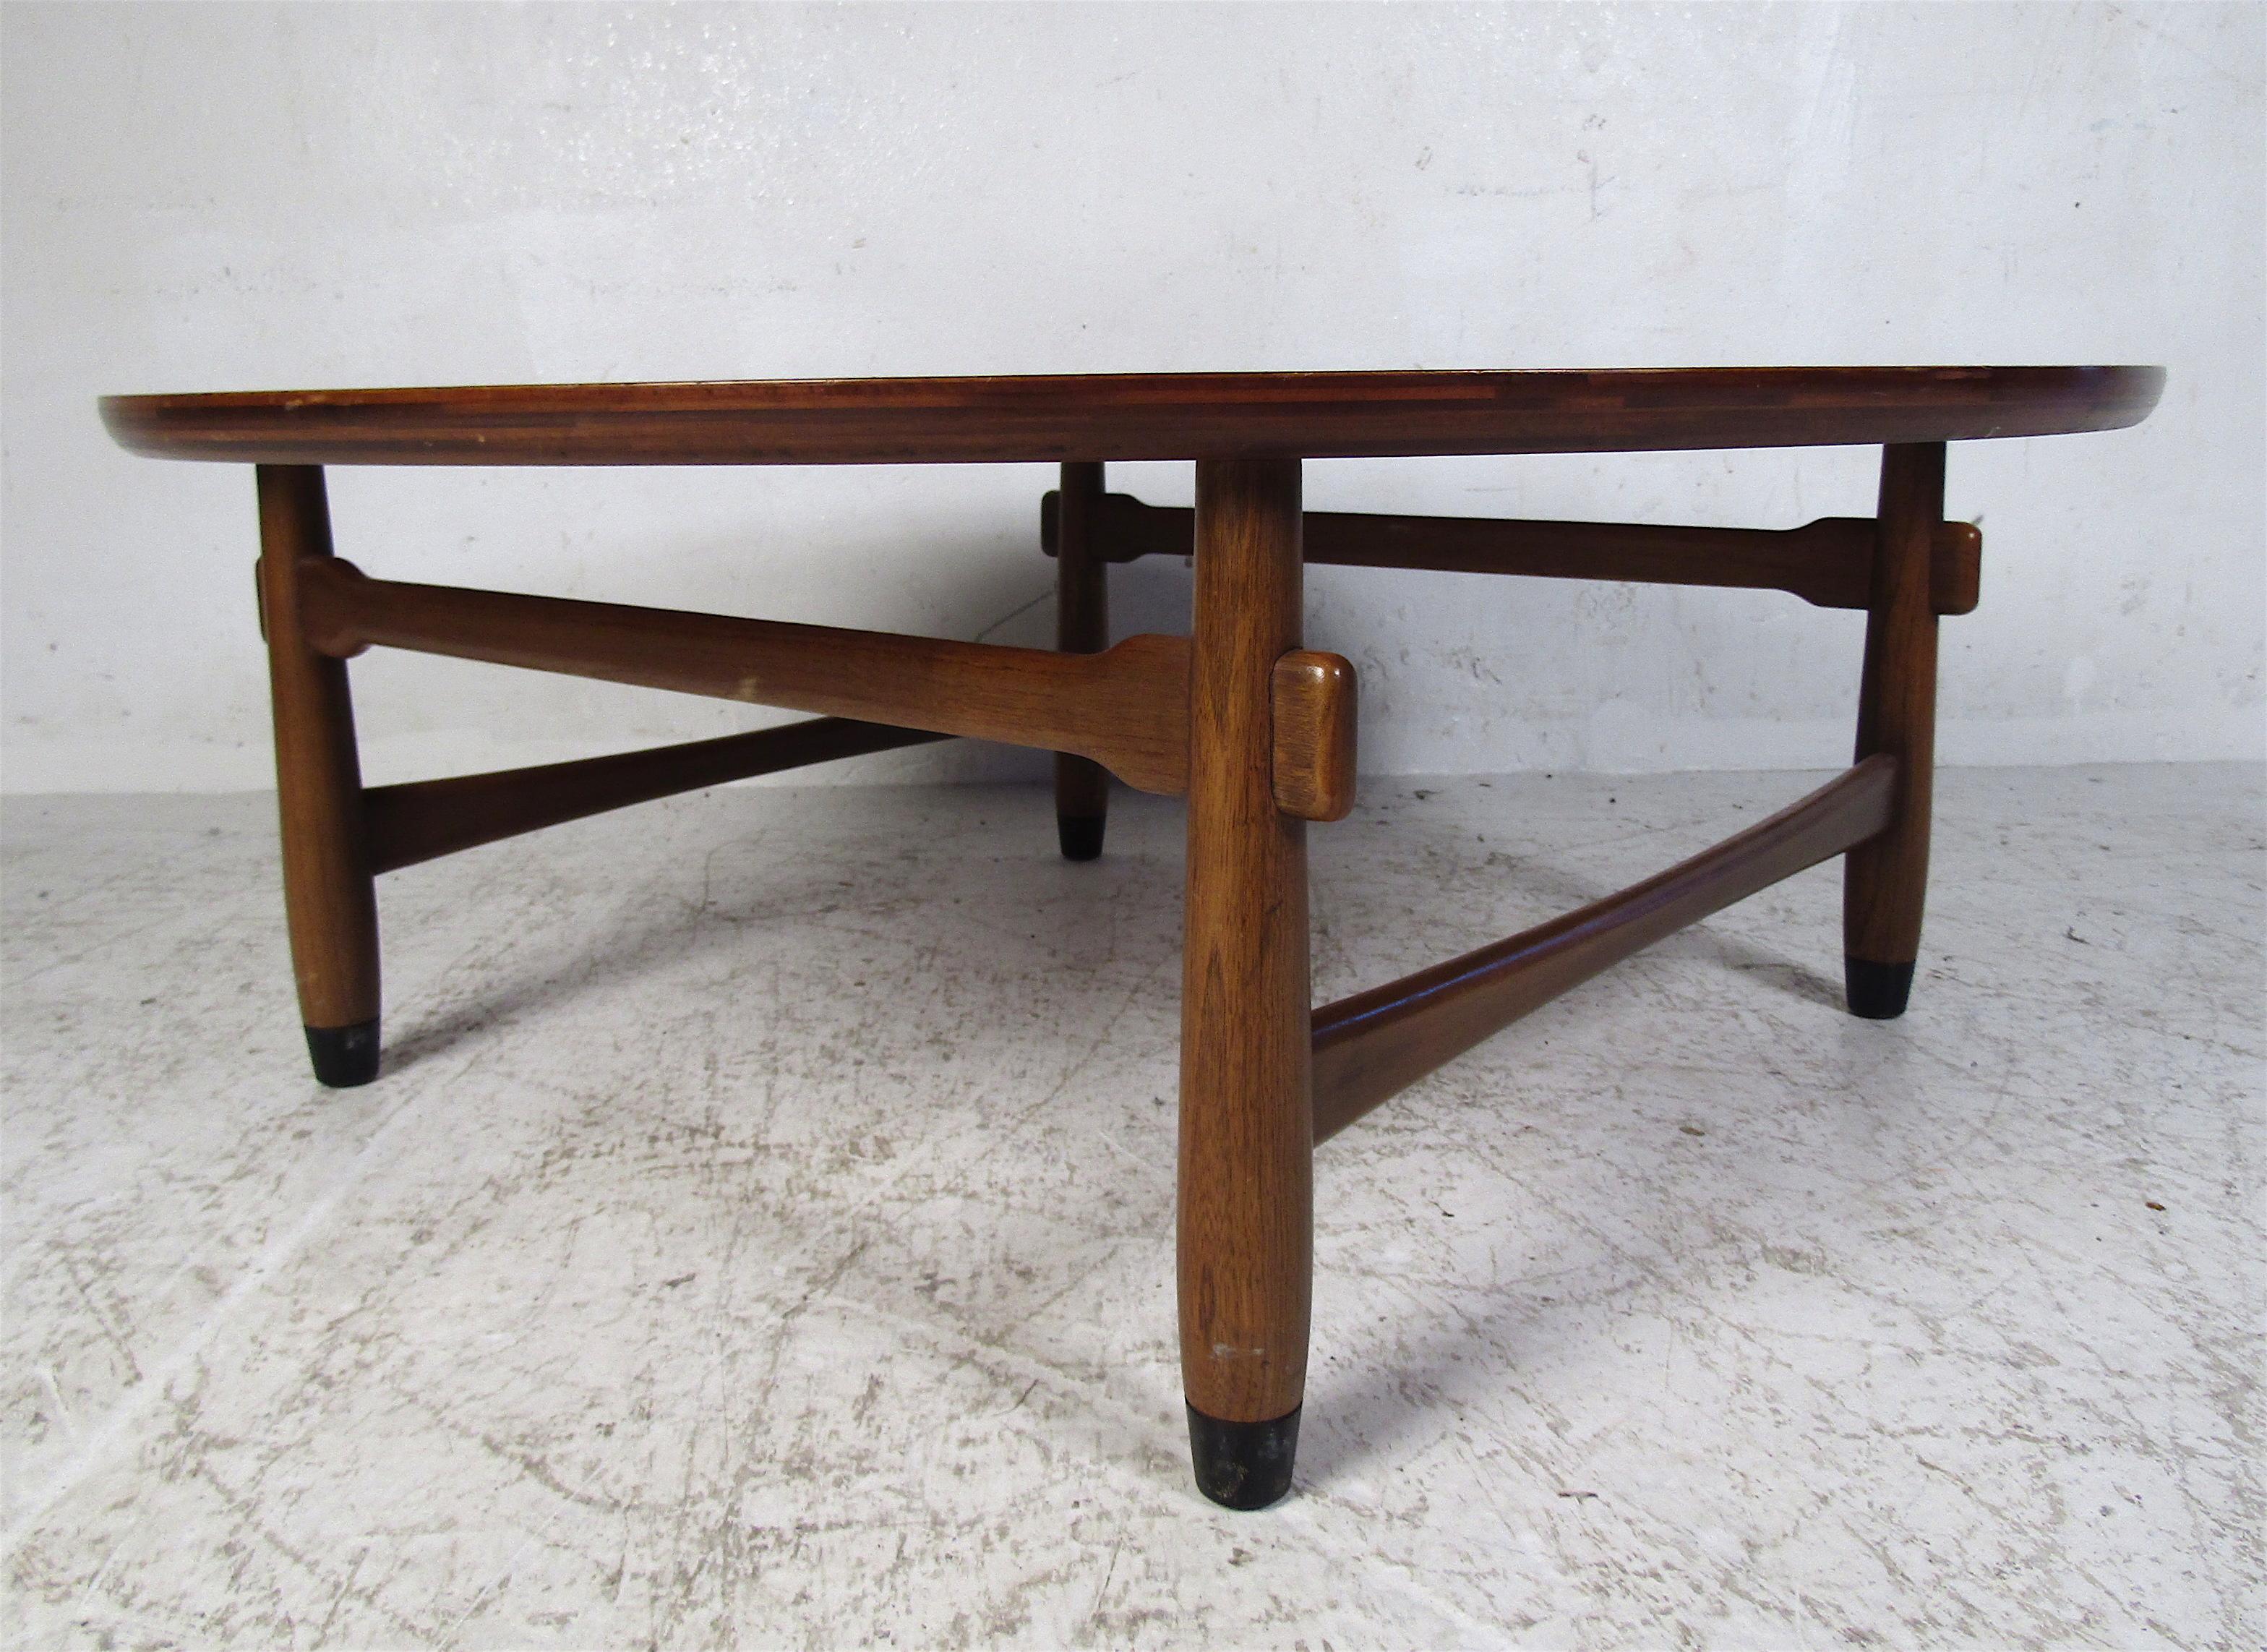 North American Mid-Century Modern Tile-Top Walnut Coffee Table by Lane